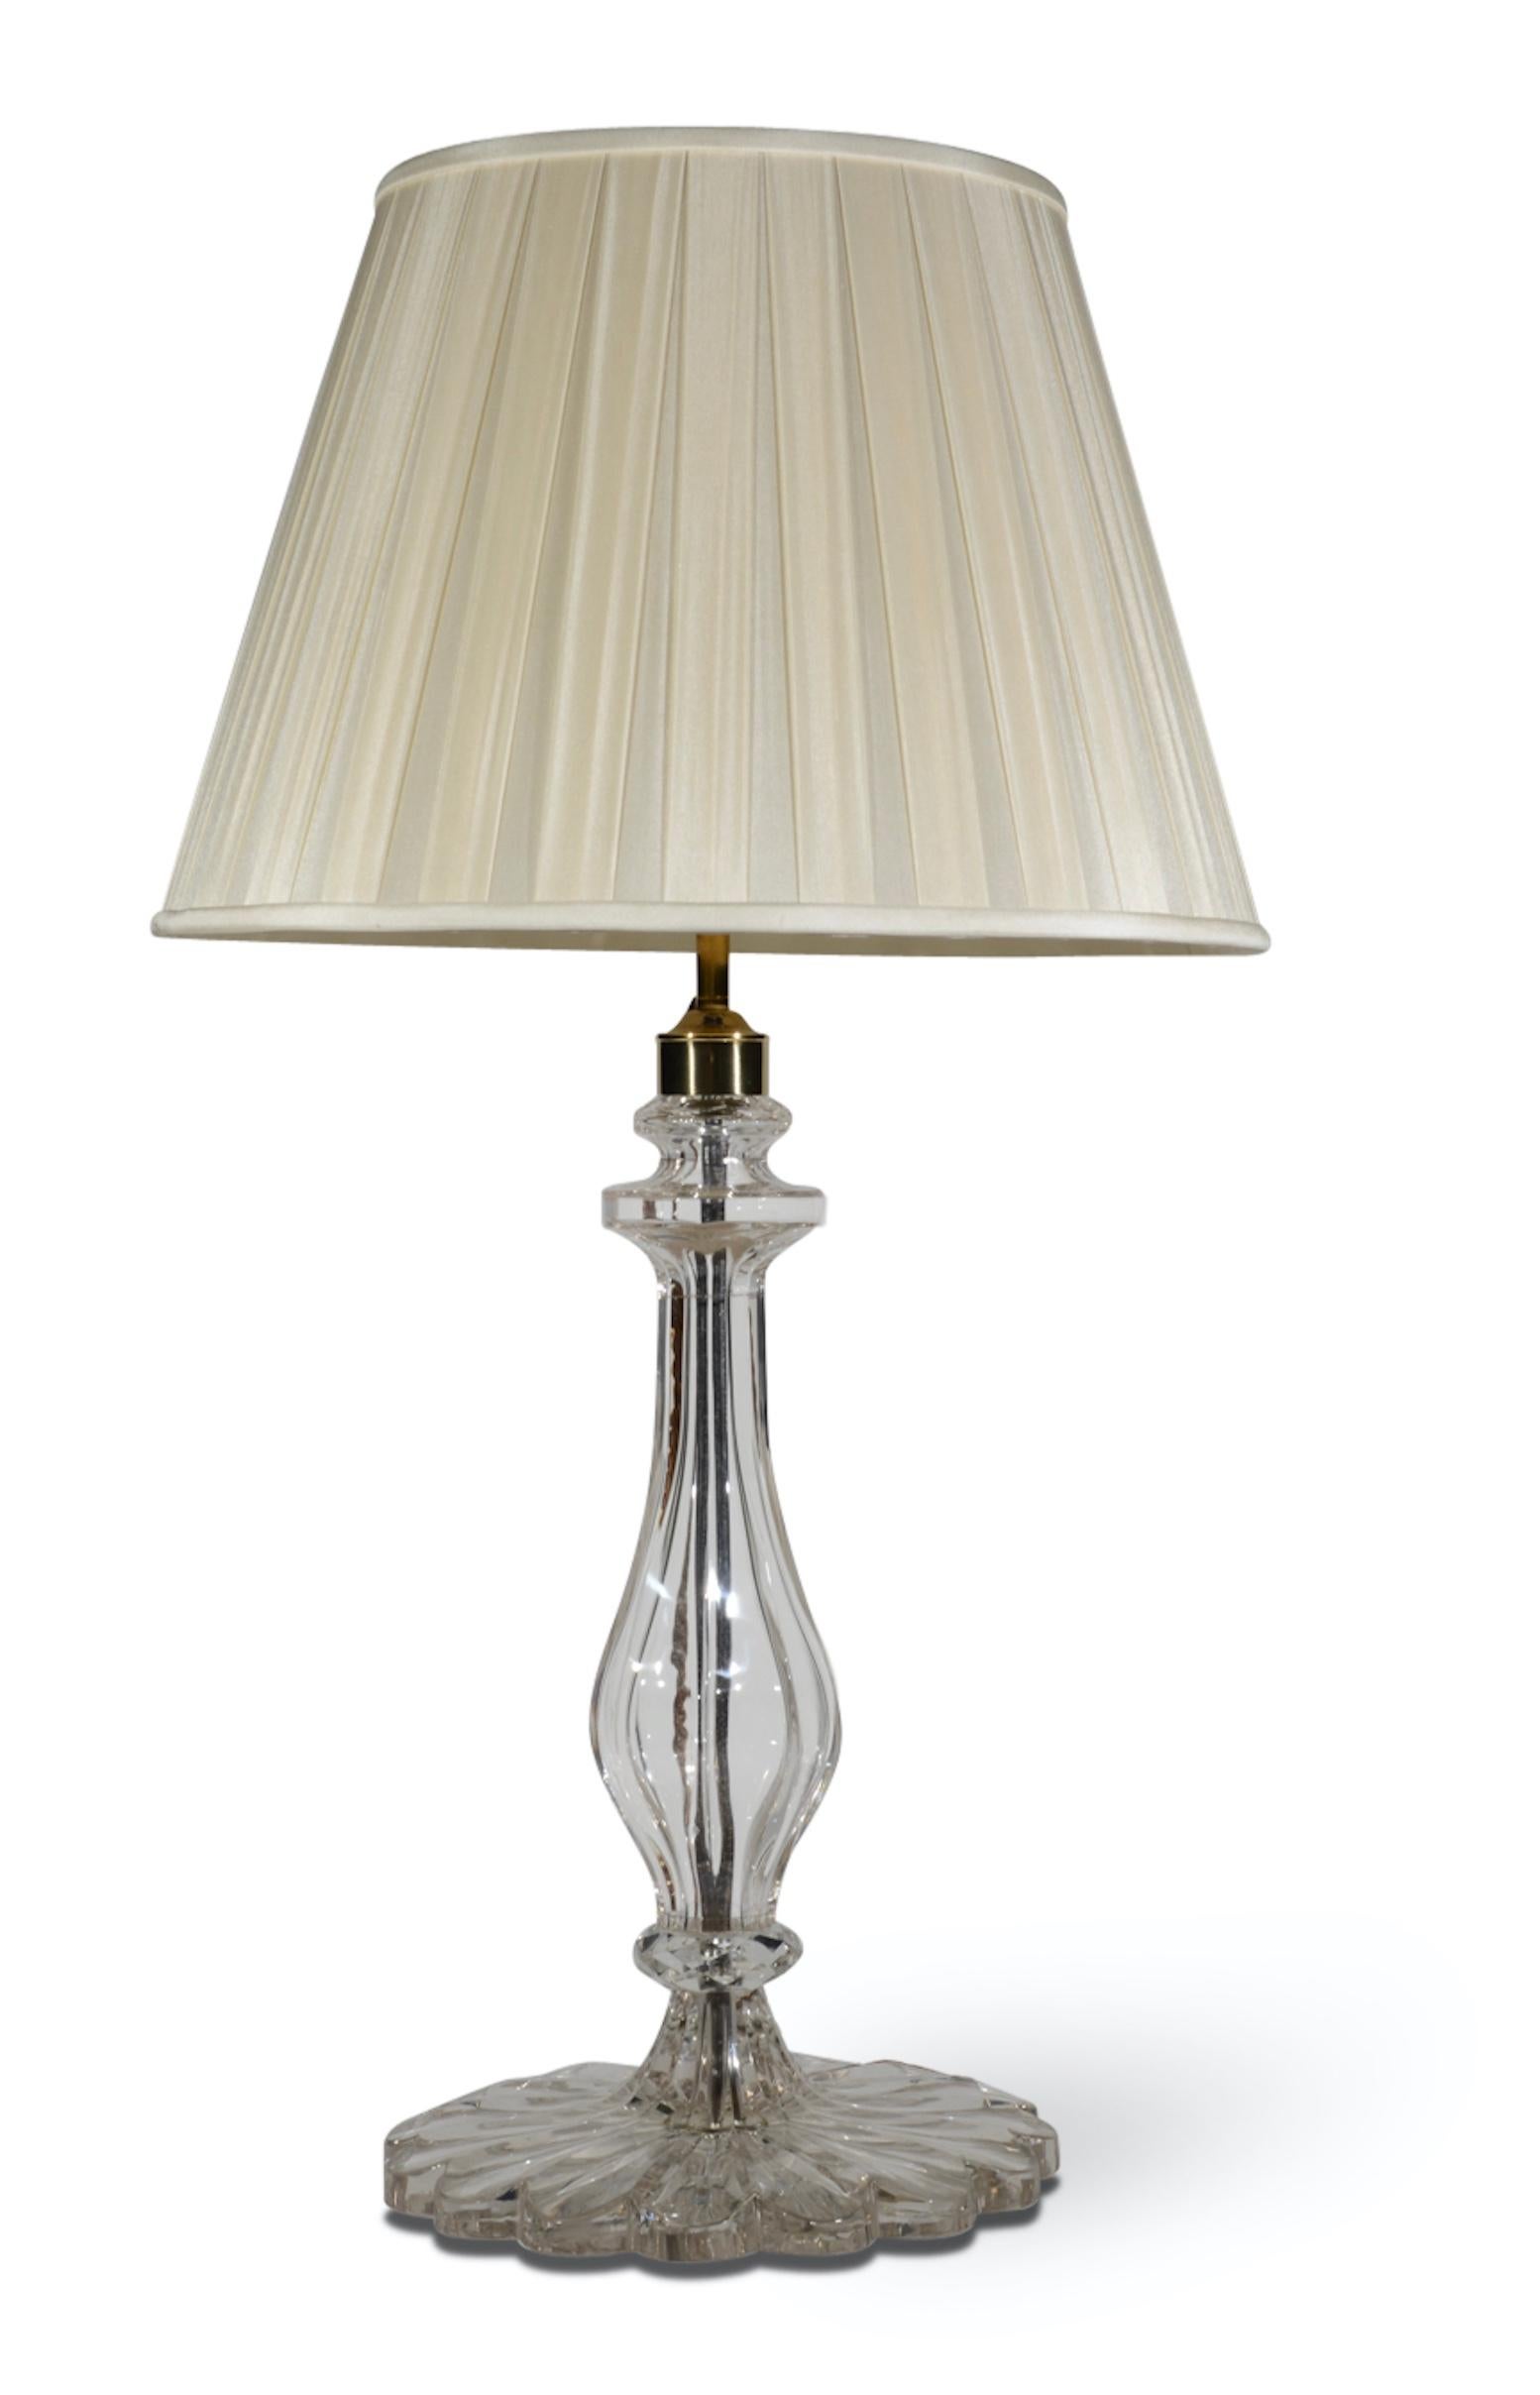 A superb pair of clear cut glass table lamps, each with moulded faceted baluster stems, and scalloped base.

Height: 19 in (48.5 cm) excluding electrical fitments and lampshades.

All of our lamps can be wired for use worldwide. A selection of card,